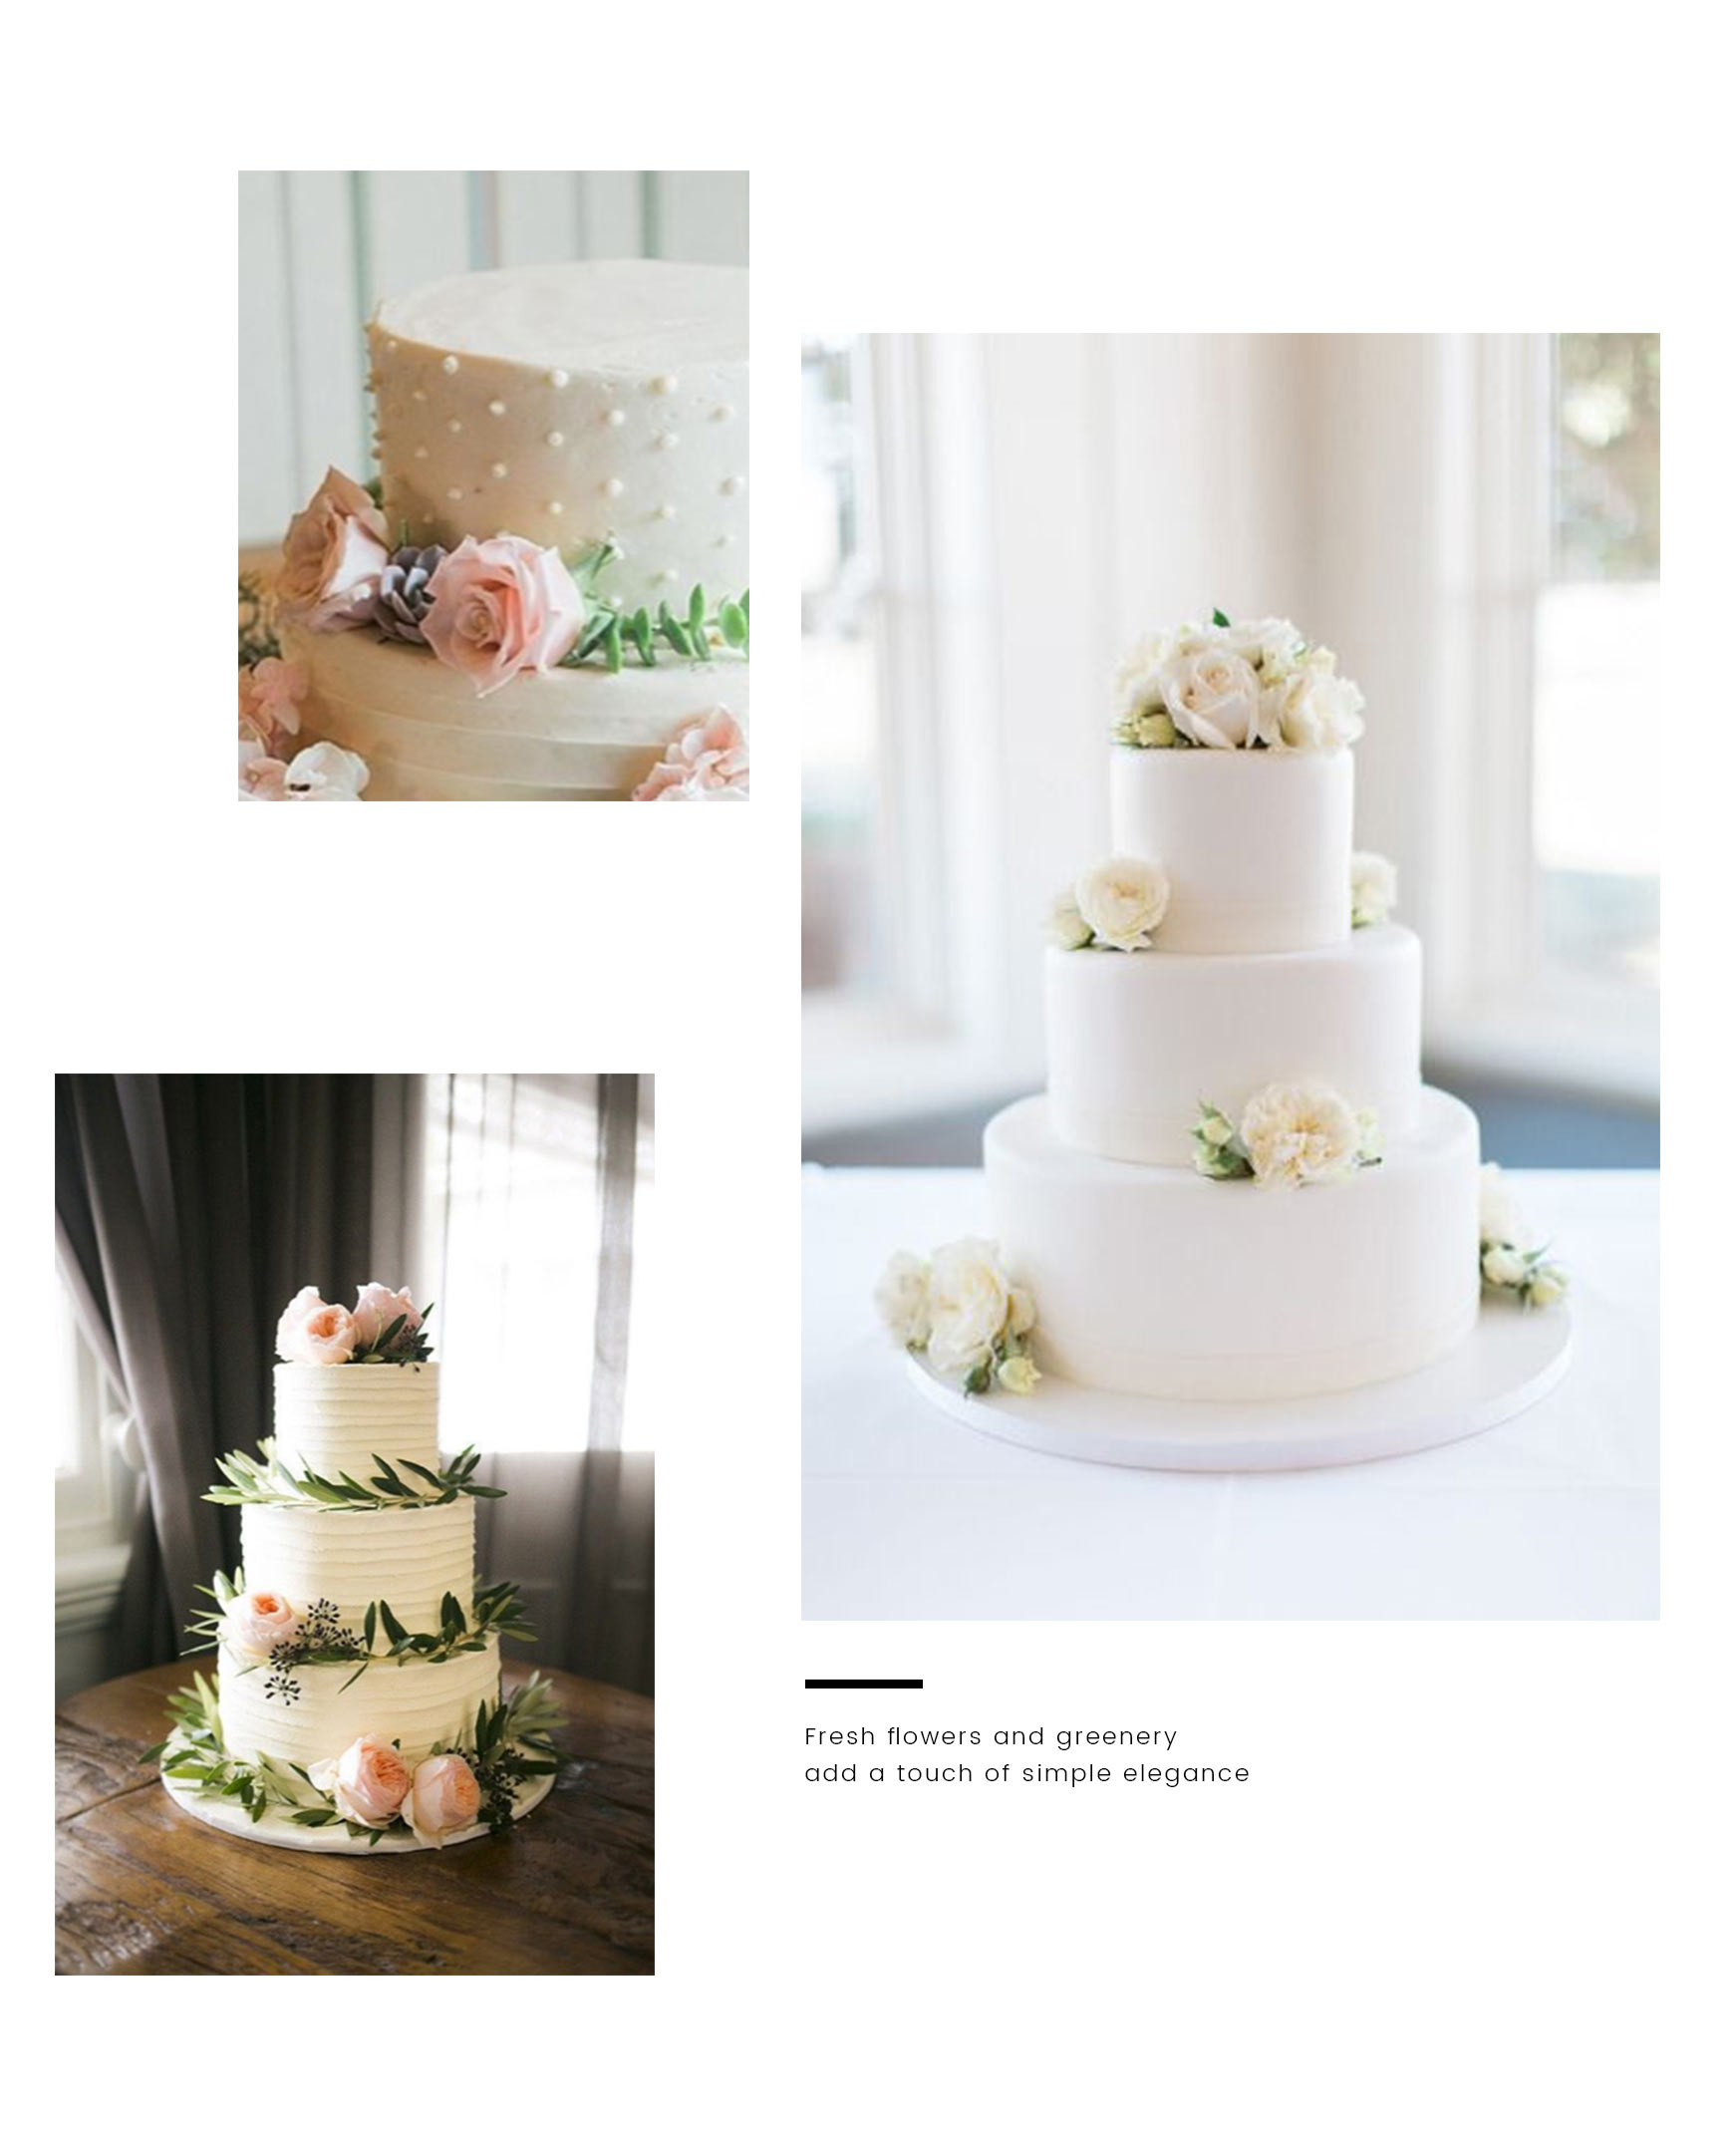 Wedding cakes from Bird Bakery decorated with fresh flowers. Caption: Fresh flowers and greener add a touch of simple elegance.